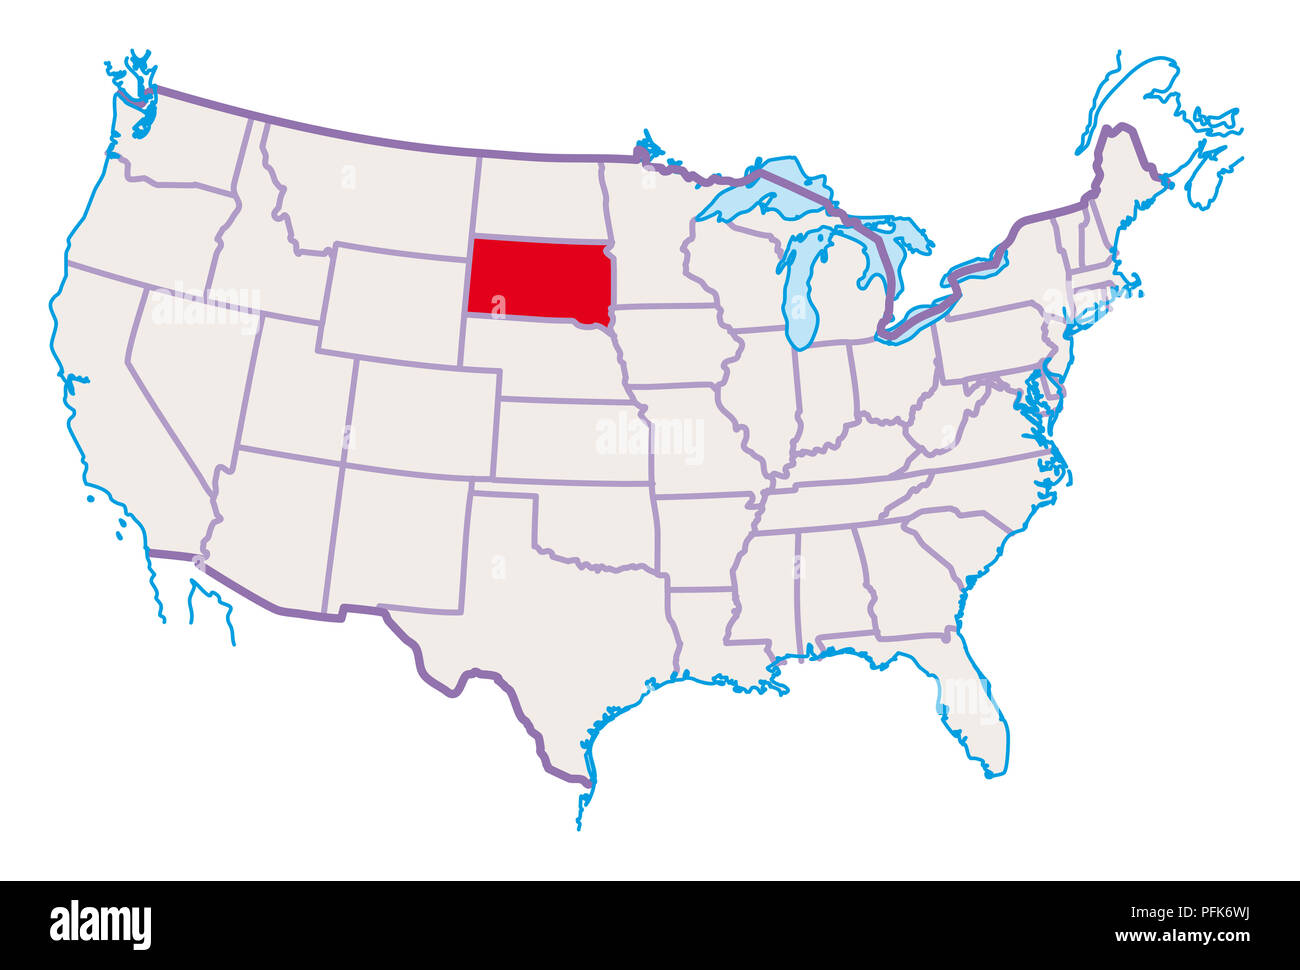 Map Of Usa South Dakota Highlighted In Red Stock Photo Alamy